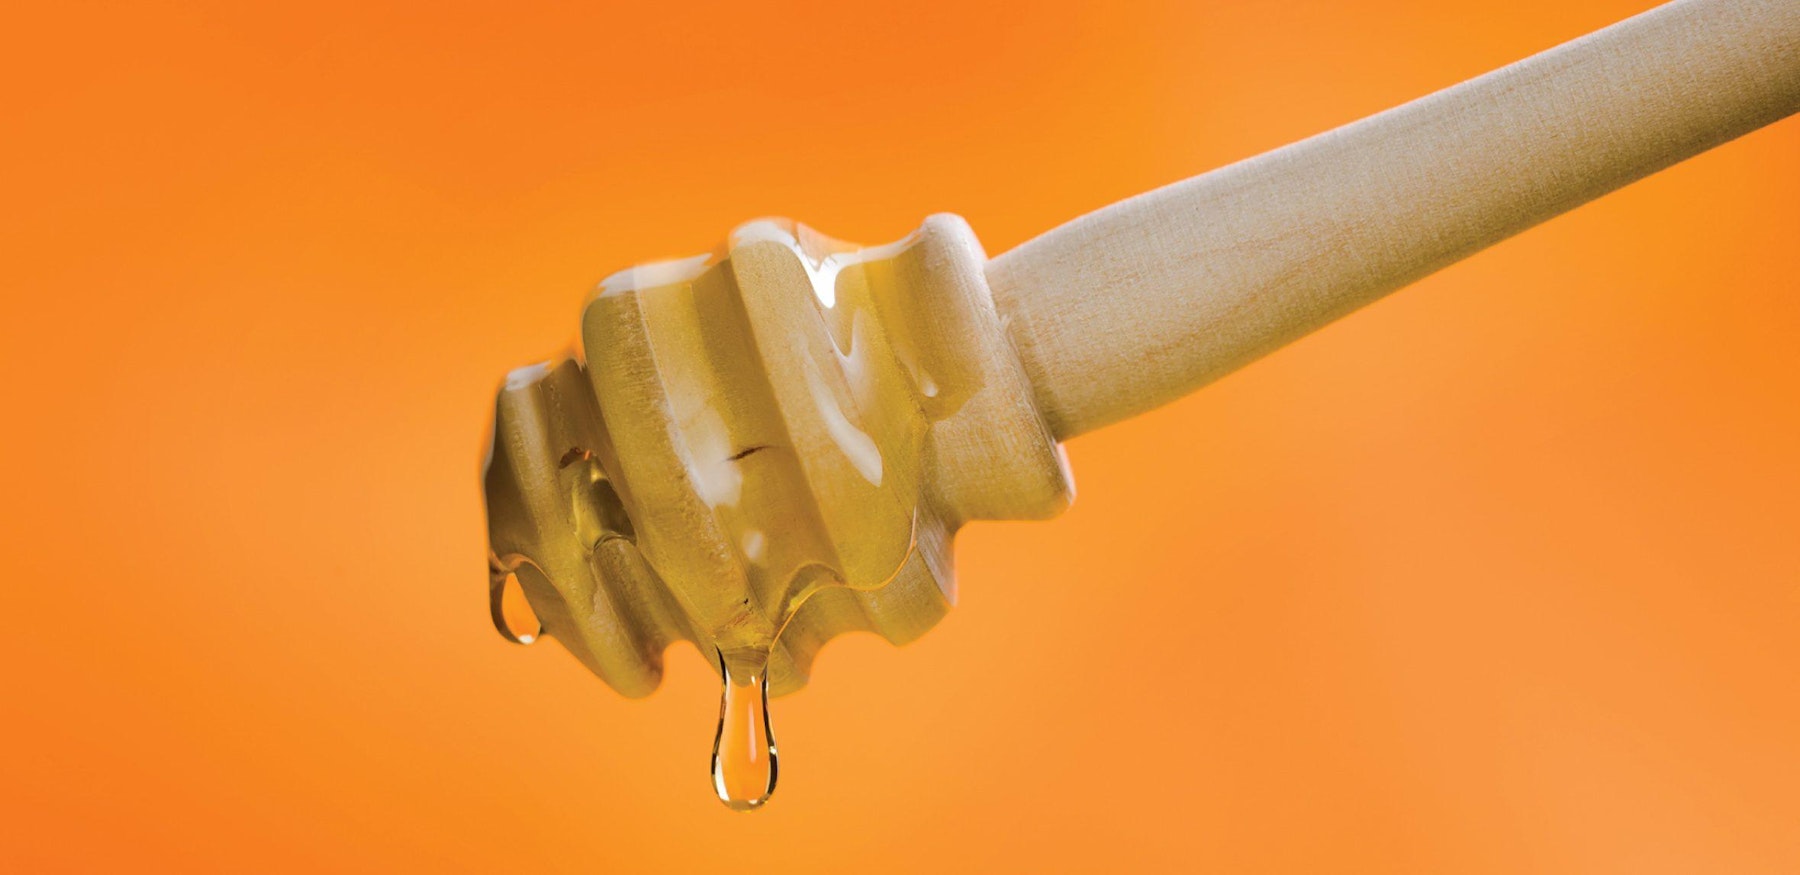 The Cargill Likewise brand name design with honey tool dripping with honey and orange background.